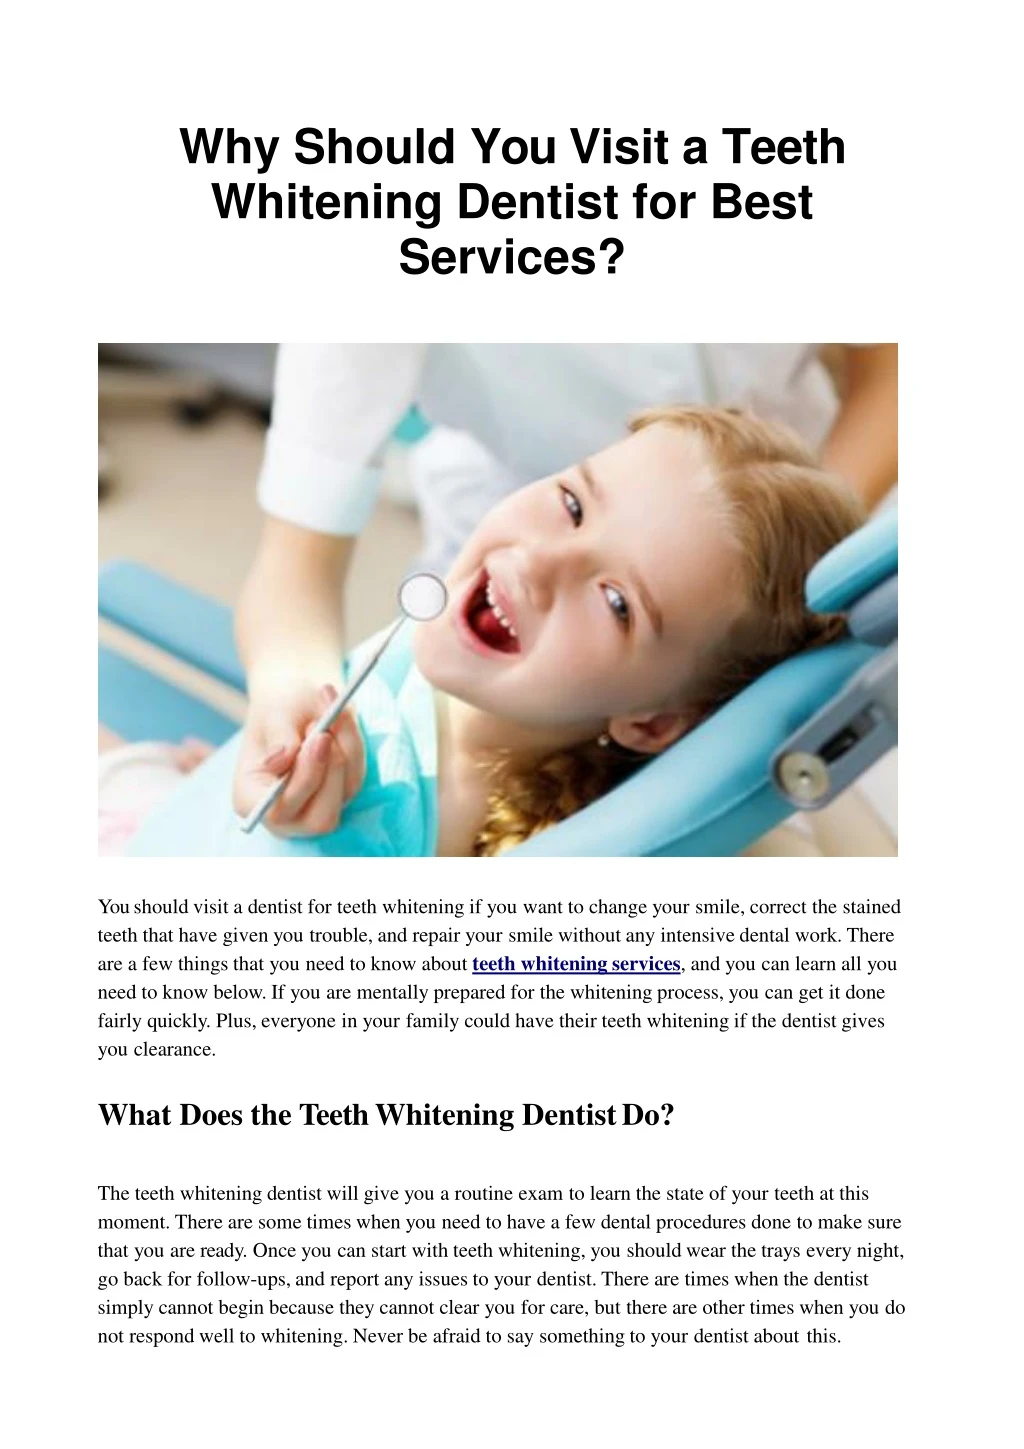 why should you visit a teeth whitening dentist for best services